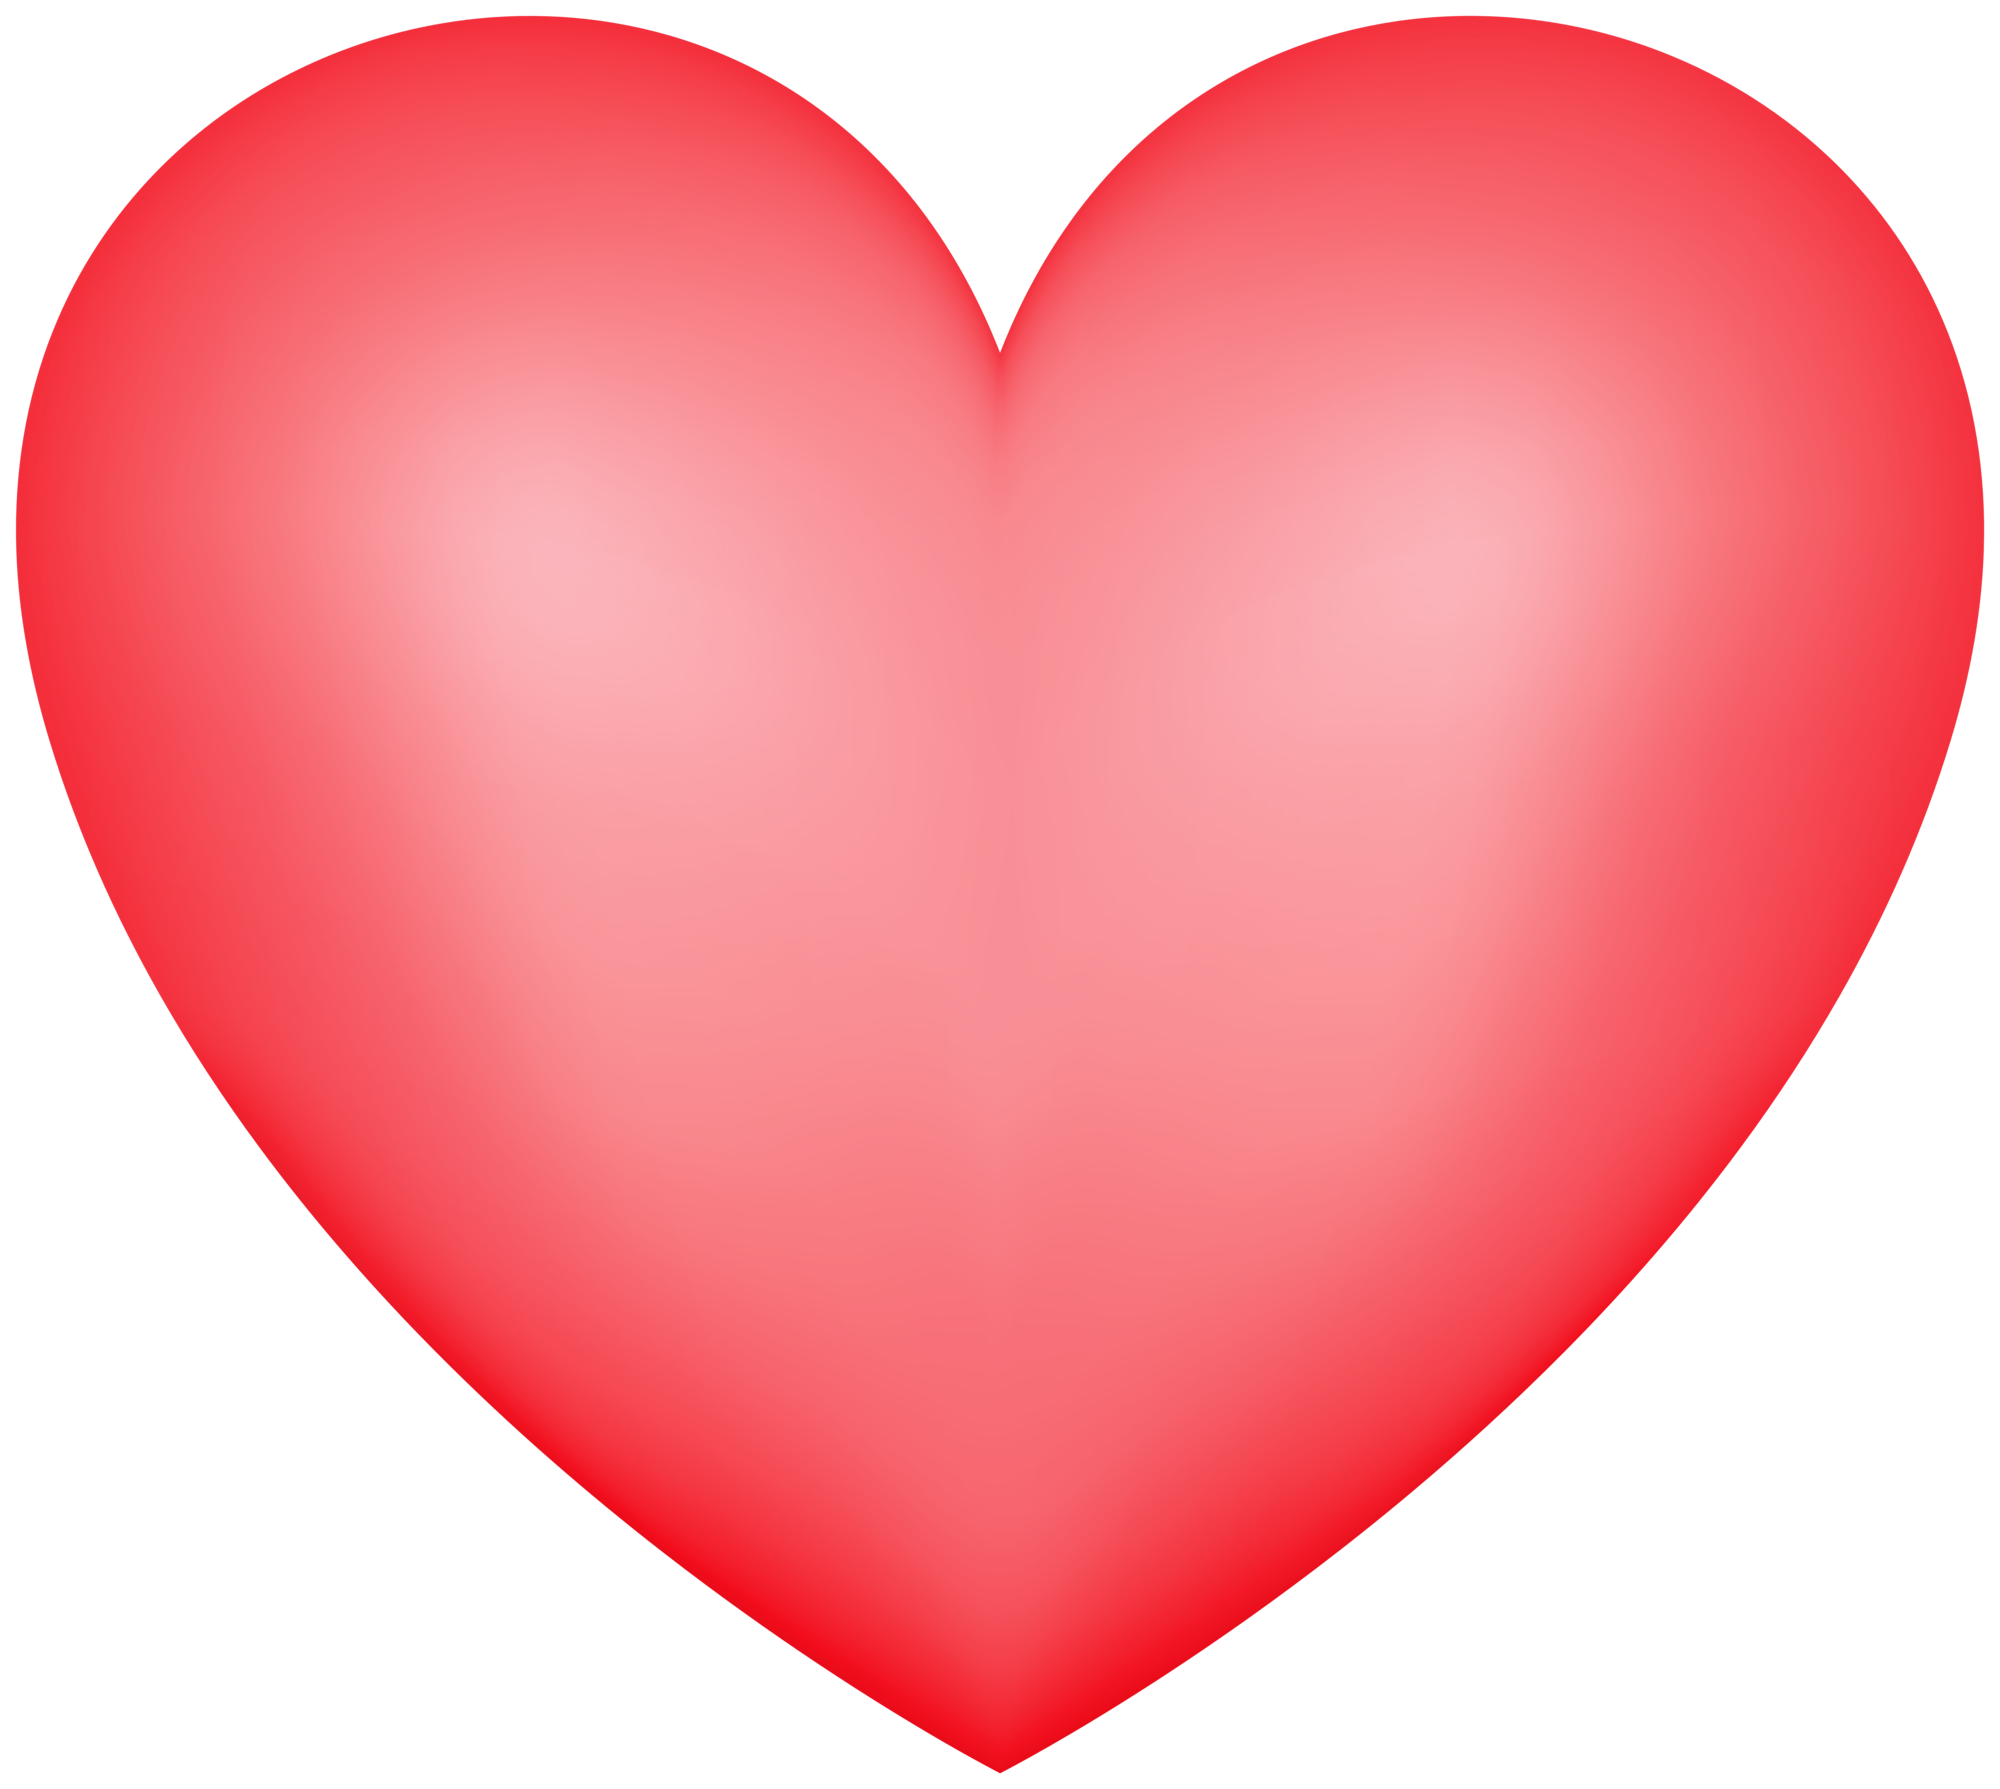 Heart Red Transparent Image